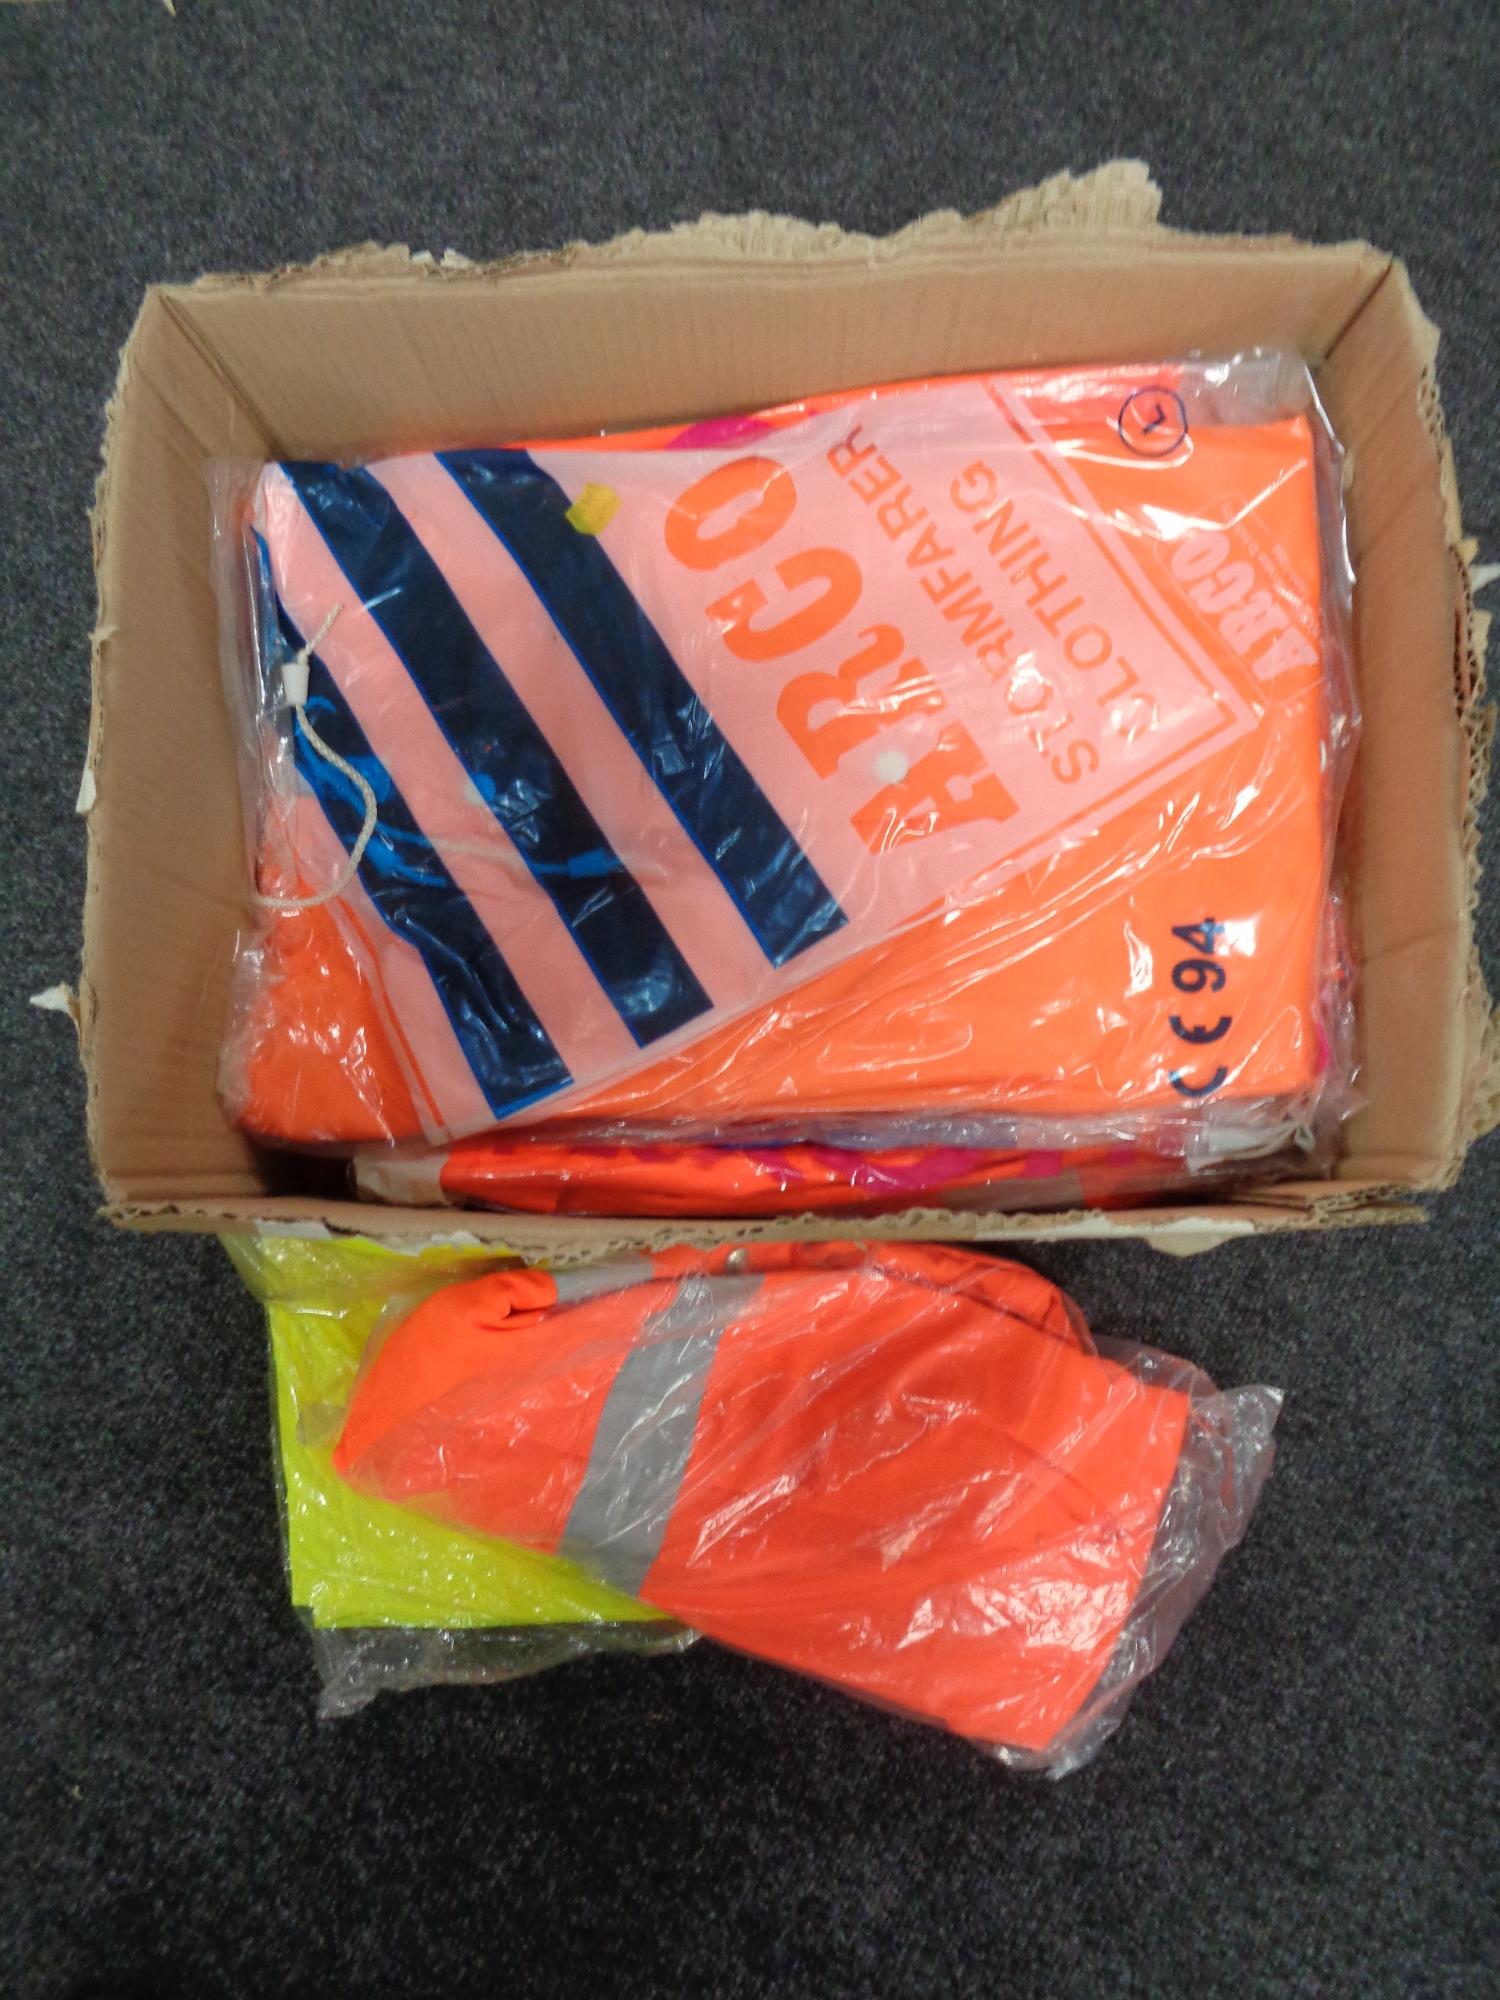 A box of new work clothes - florescent trousers and coats